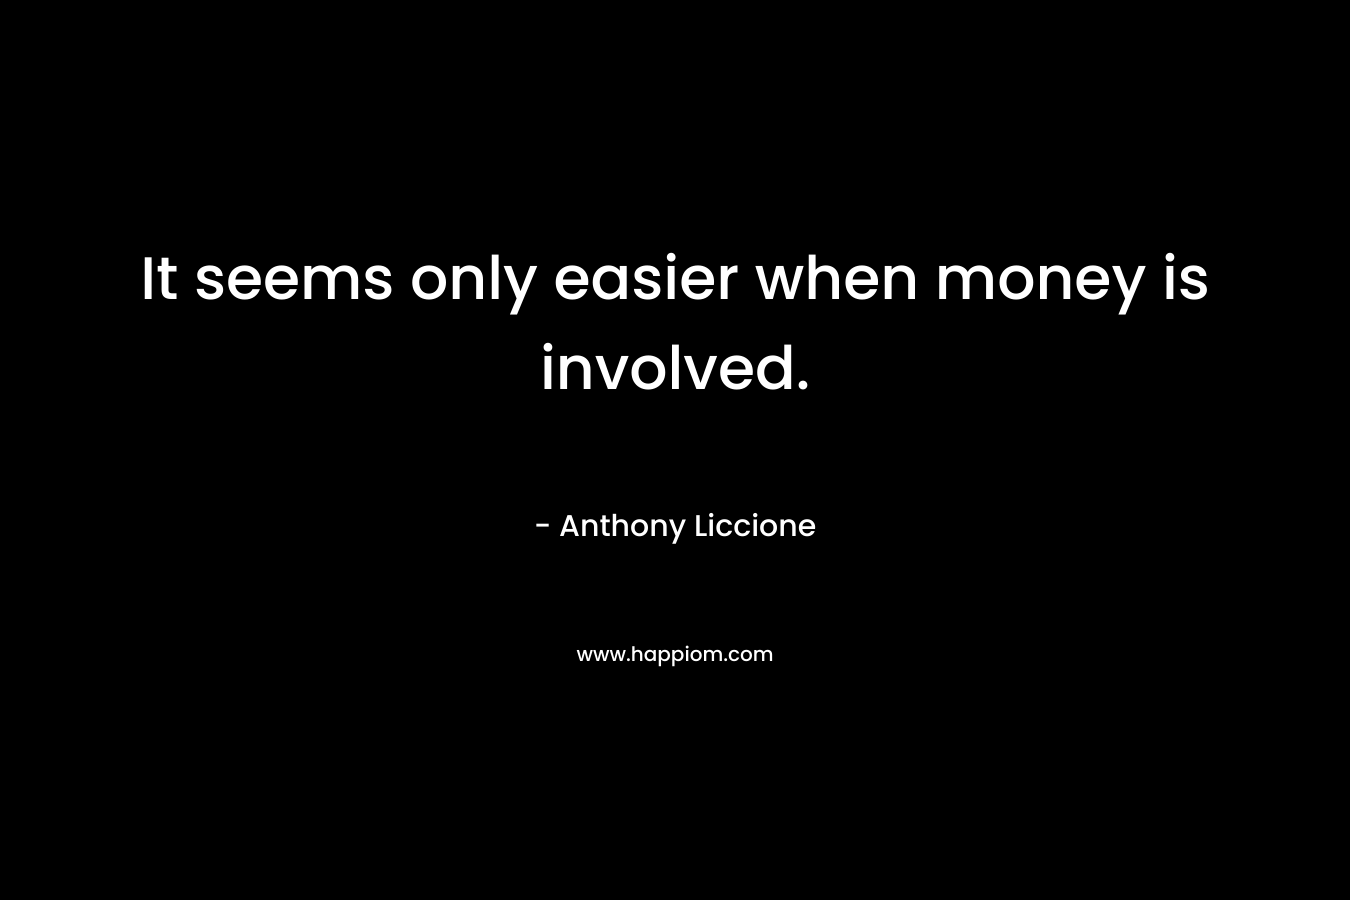 It seems only easier when money is involved. – Anthony Liccione